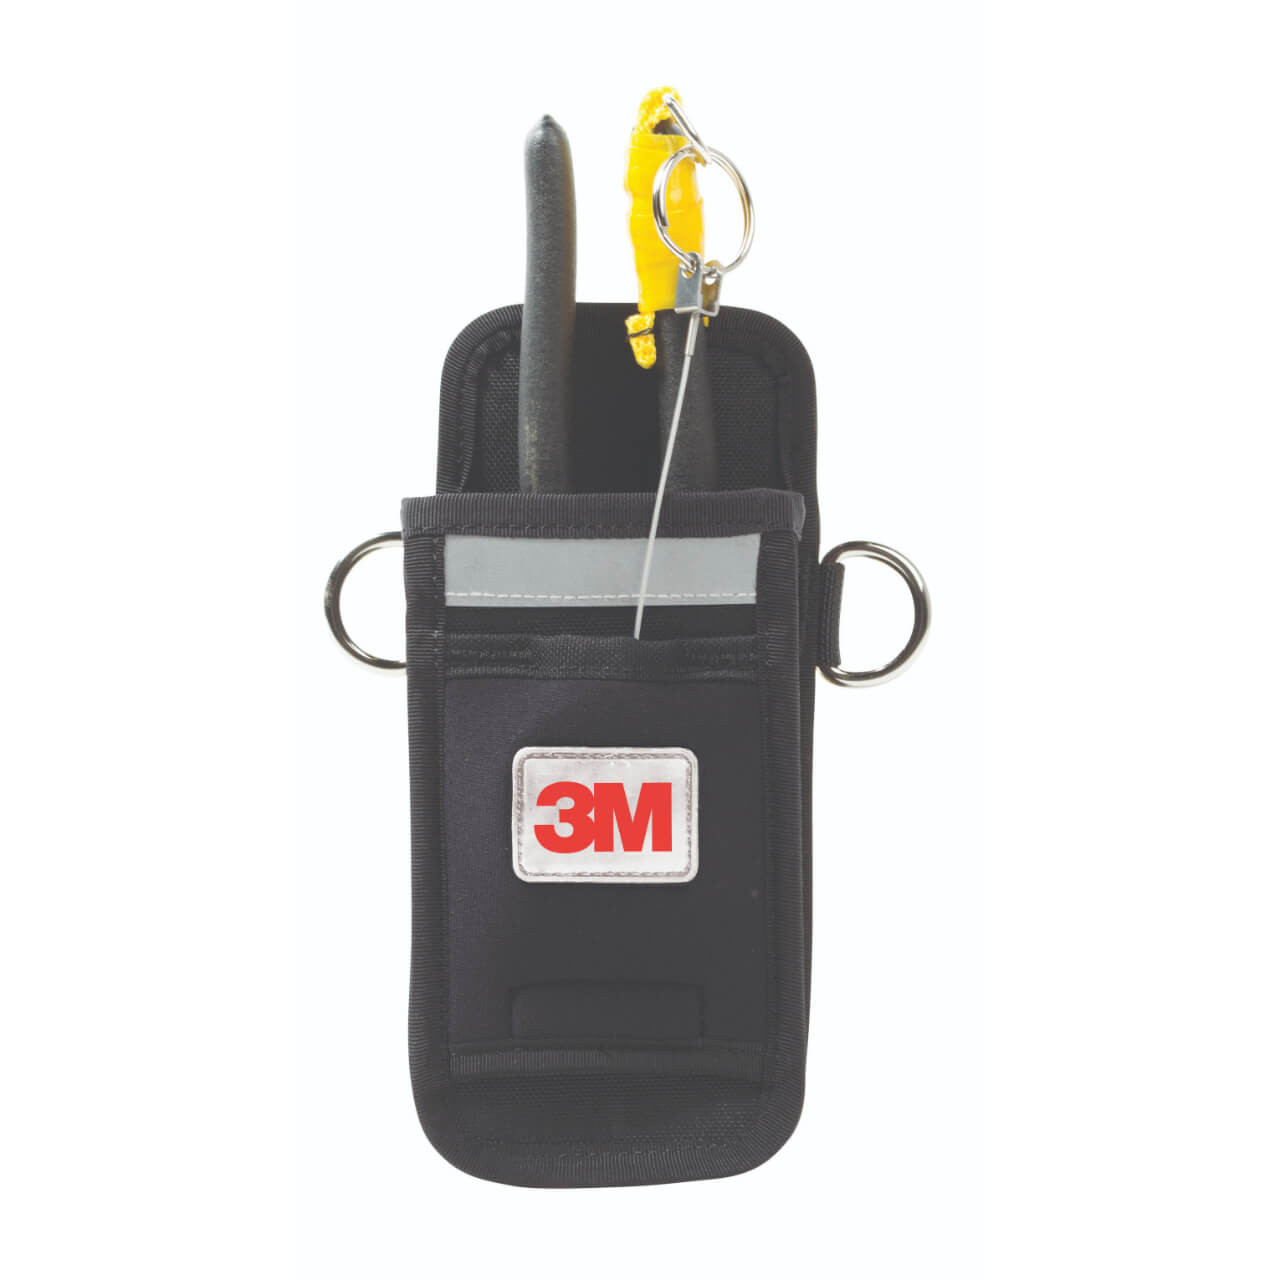 3M DBI-SALA Holsters Single Tool Holster with retractor, harness attachment